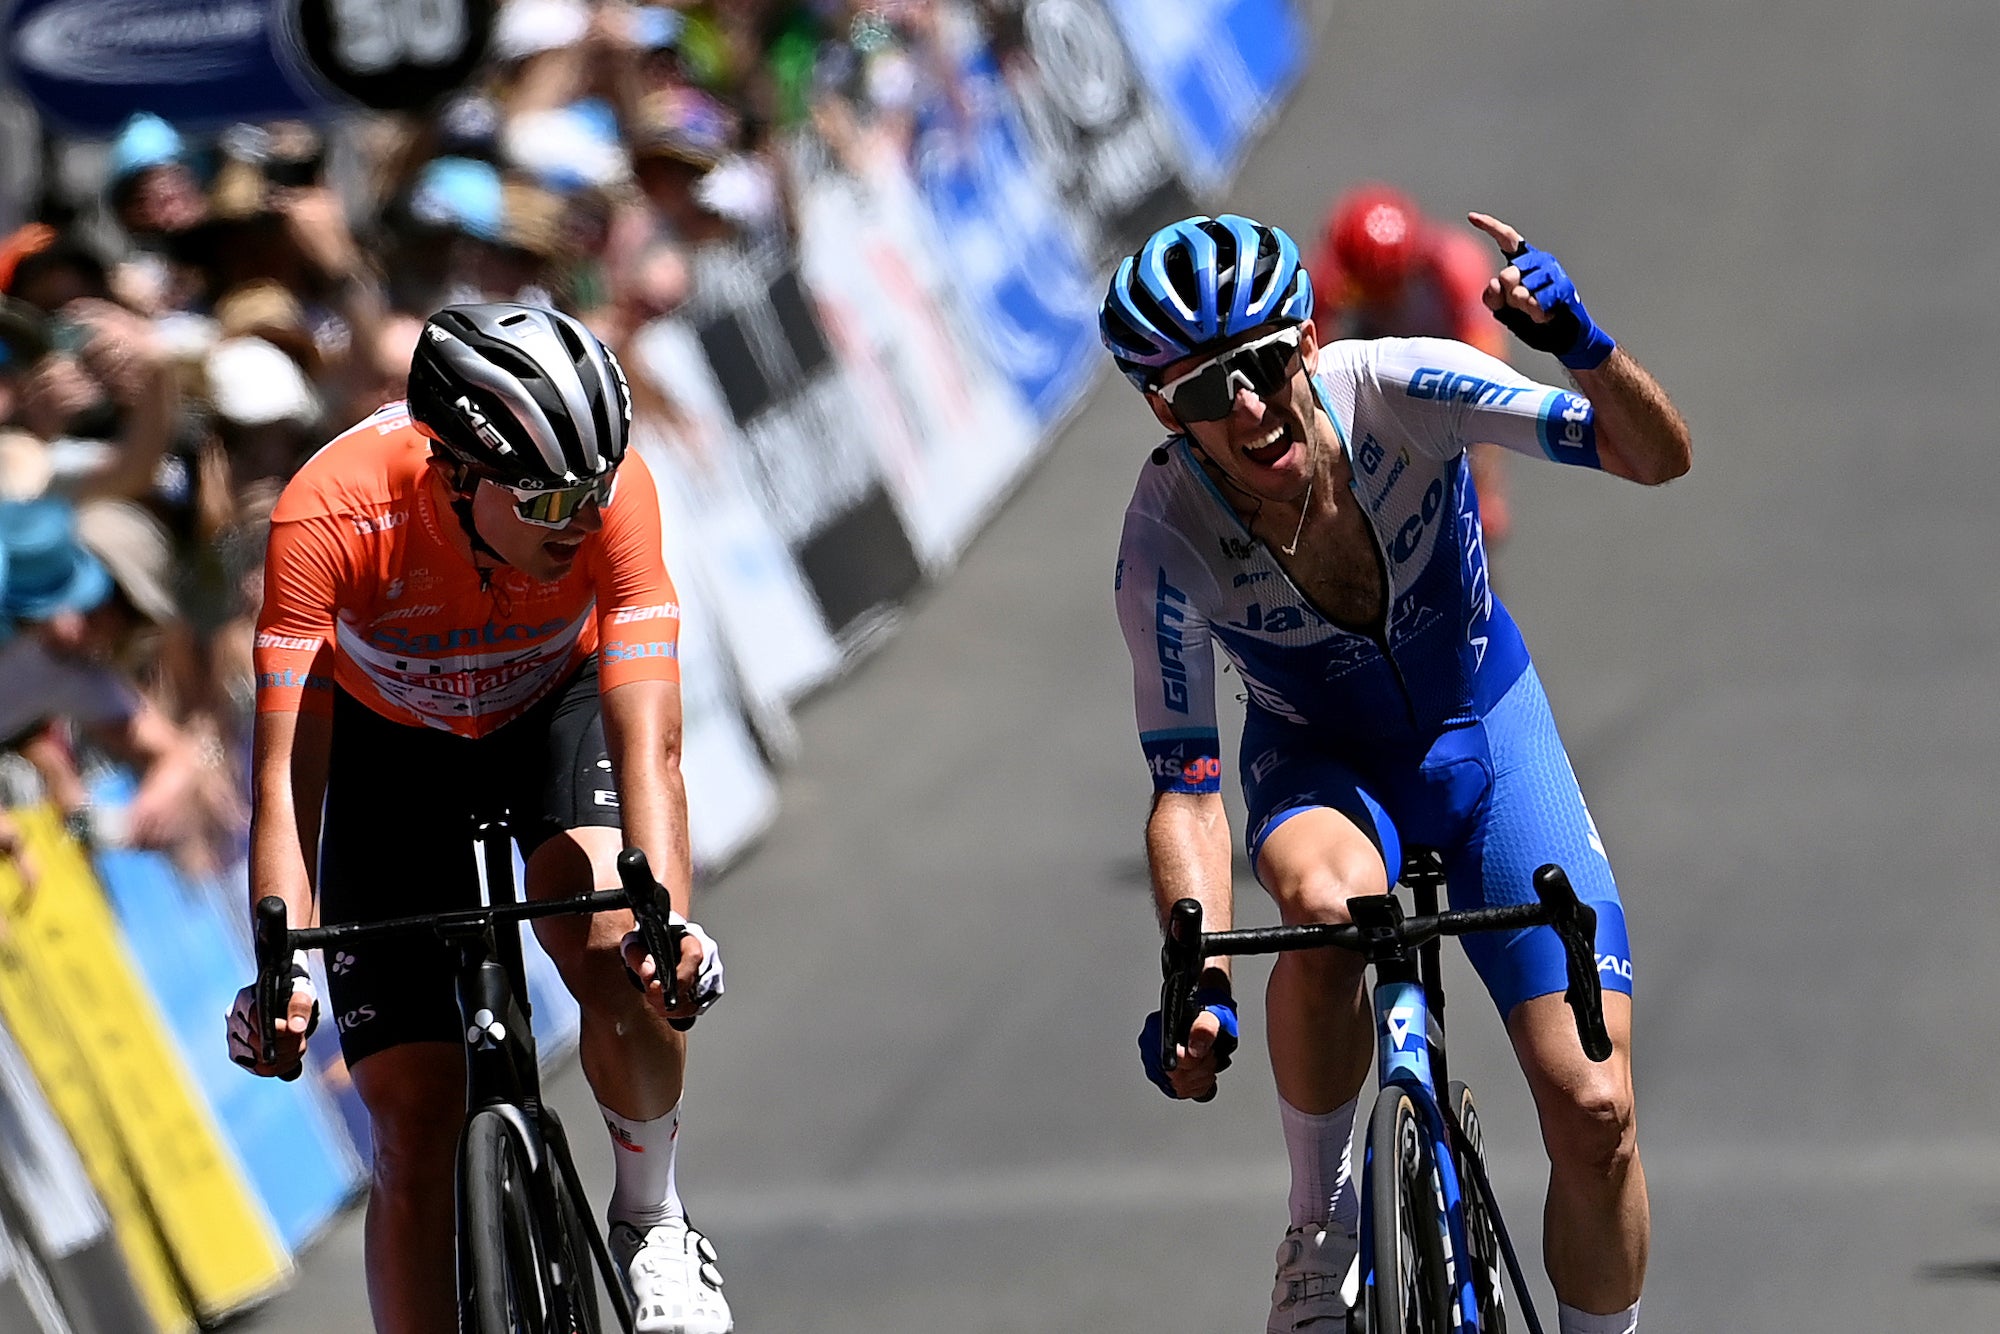 Tour Down Under S5 Simon Yates wins stage, Jay Vine secures overall